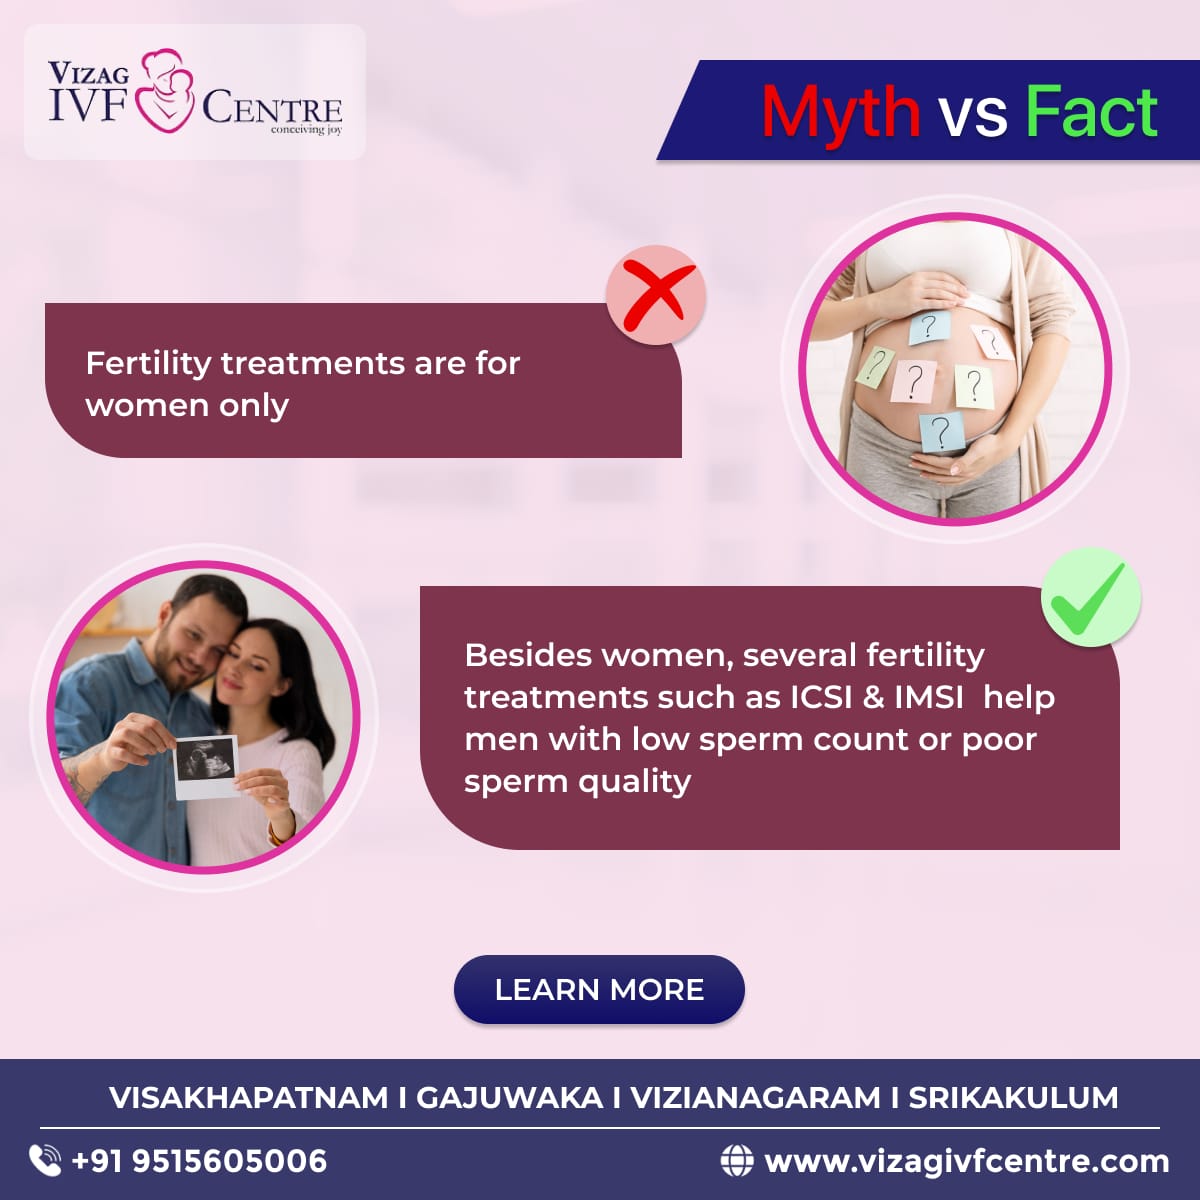 Separate myths from facts! Learn the truth about treatments and empower yourself with accurate information on the path to parenthood.
#VizagIVF #BestIVFinVizag #BestIVFCentre #BestIVFinVisakhapatnam #VizagIVFCentre #IVFMythsAndFacts #FertilityTruths #IVFAwareness #FertilityFacts